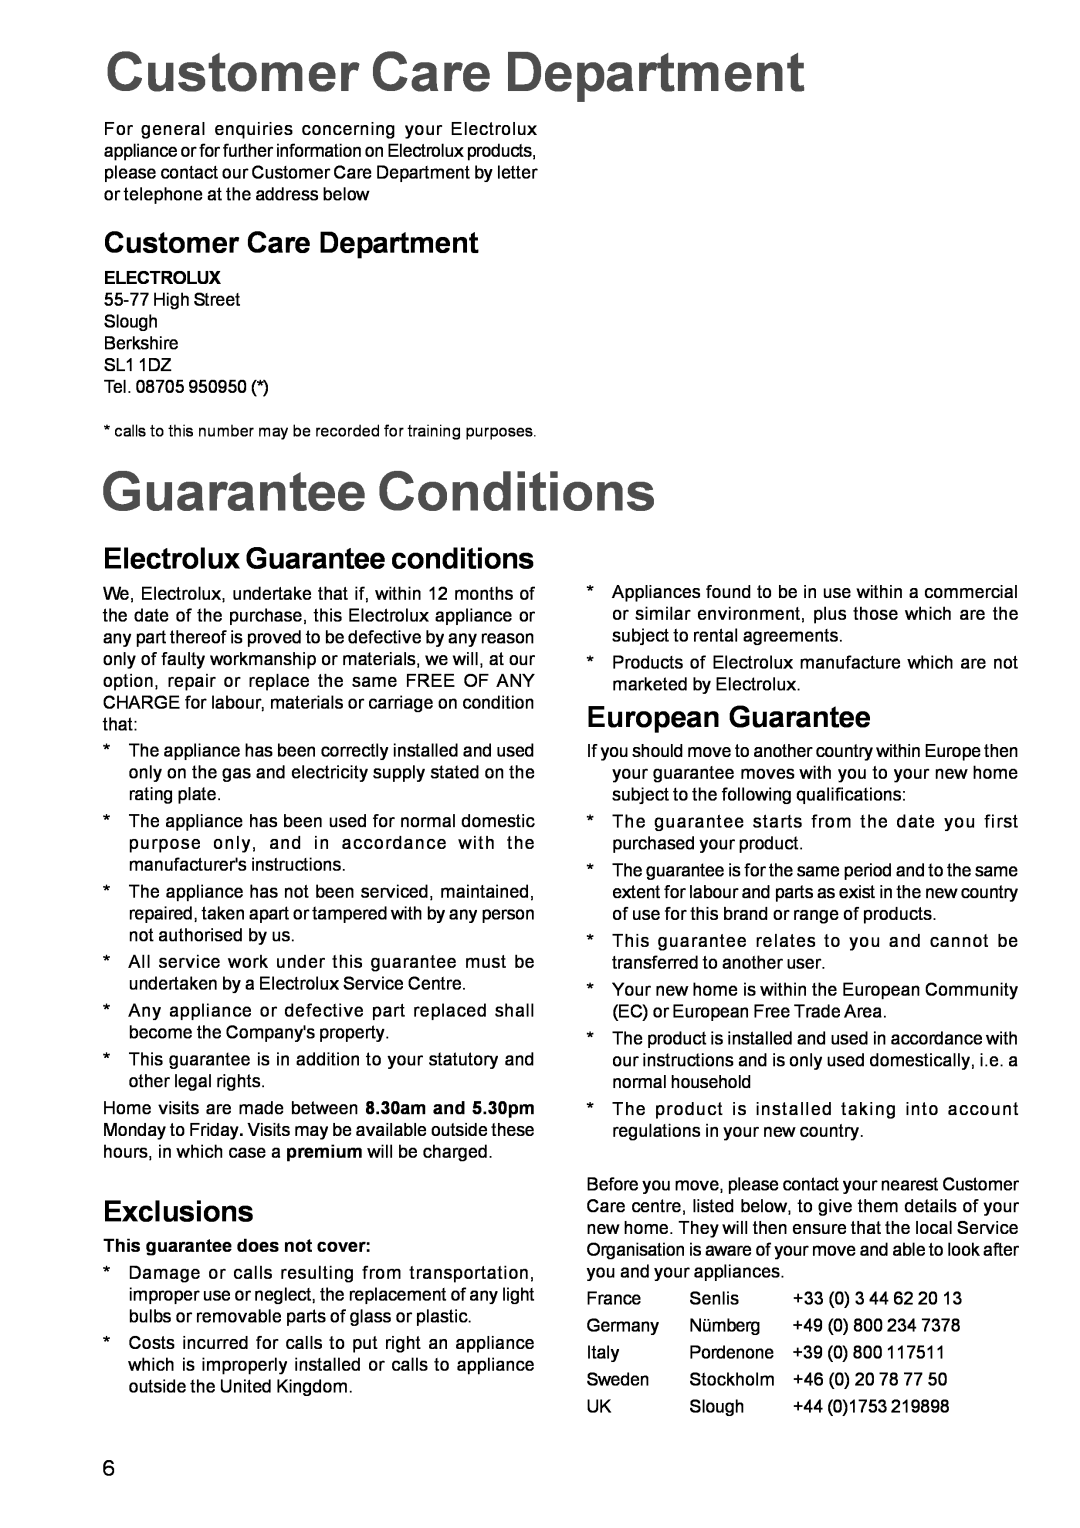 Electrolux EHG 680 manual Customer Care Department, Guarantee Conditions, Electrolux Guarantee conditions, Exclusions 